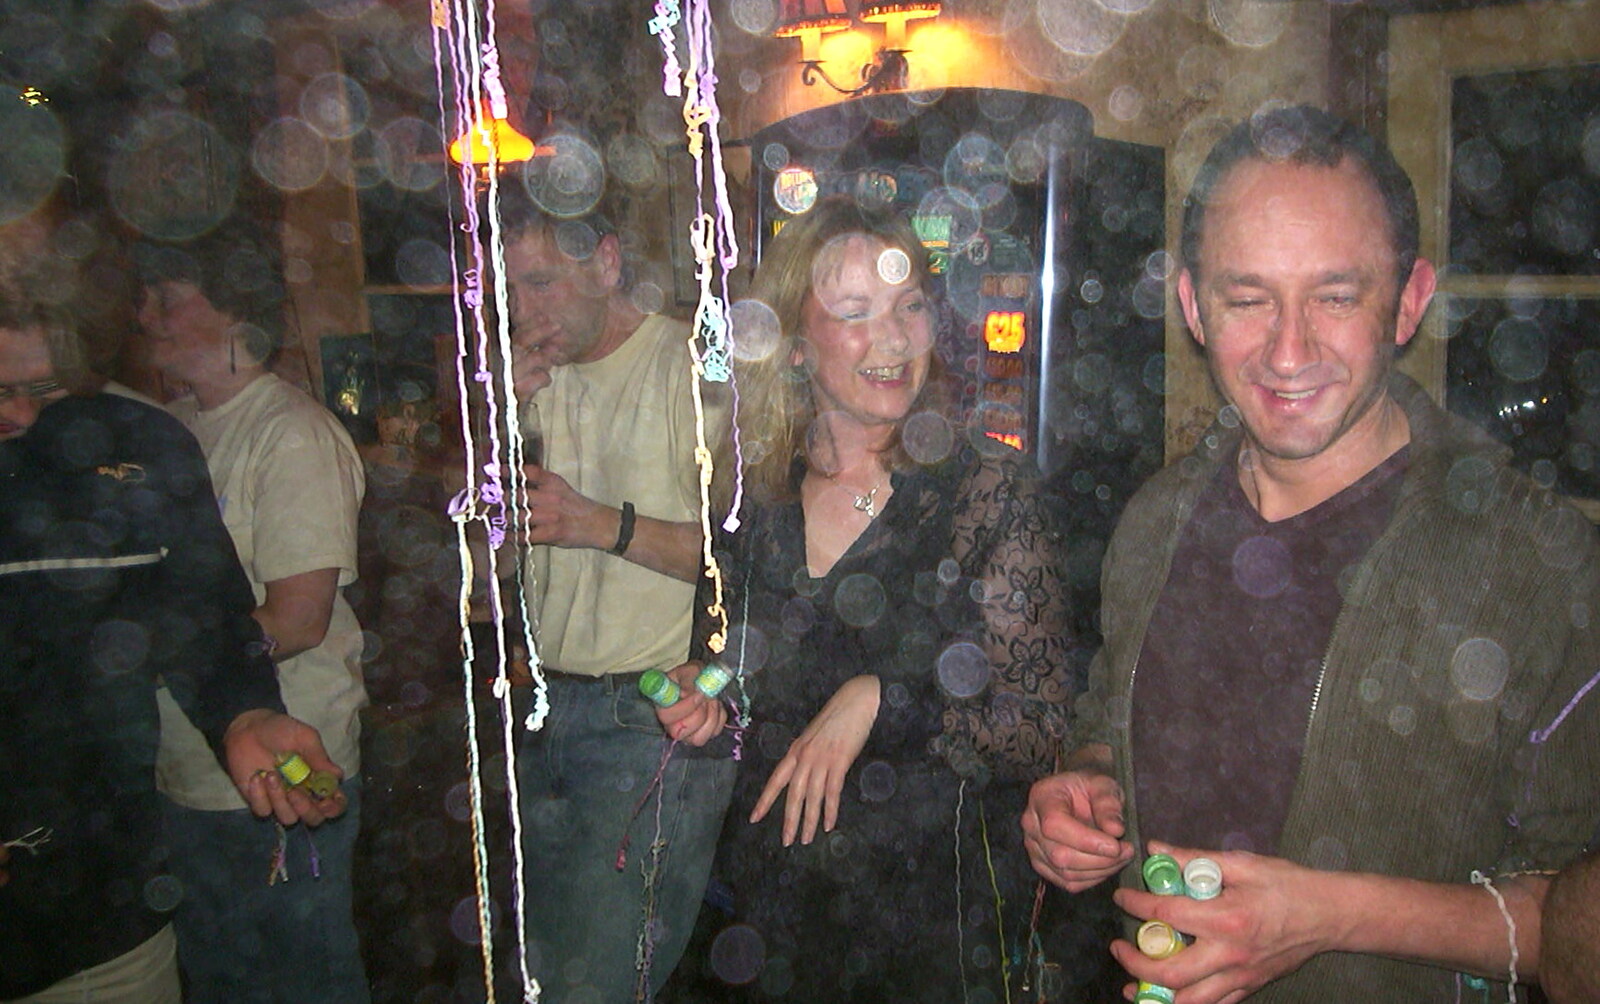 New Year's Eve at the Swan Inn, Brome, Suffolk - 31st December 2002: DH in a miasma of streamers and smoke